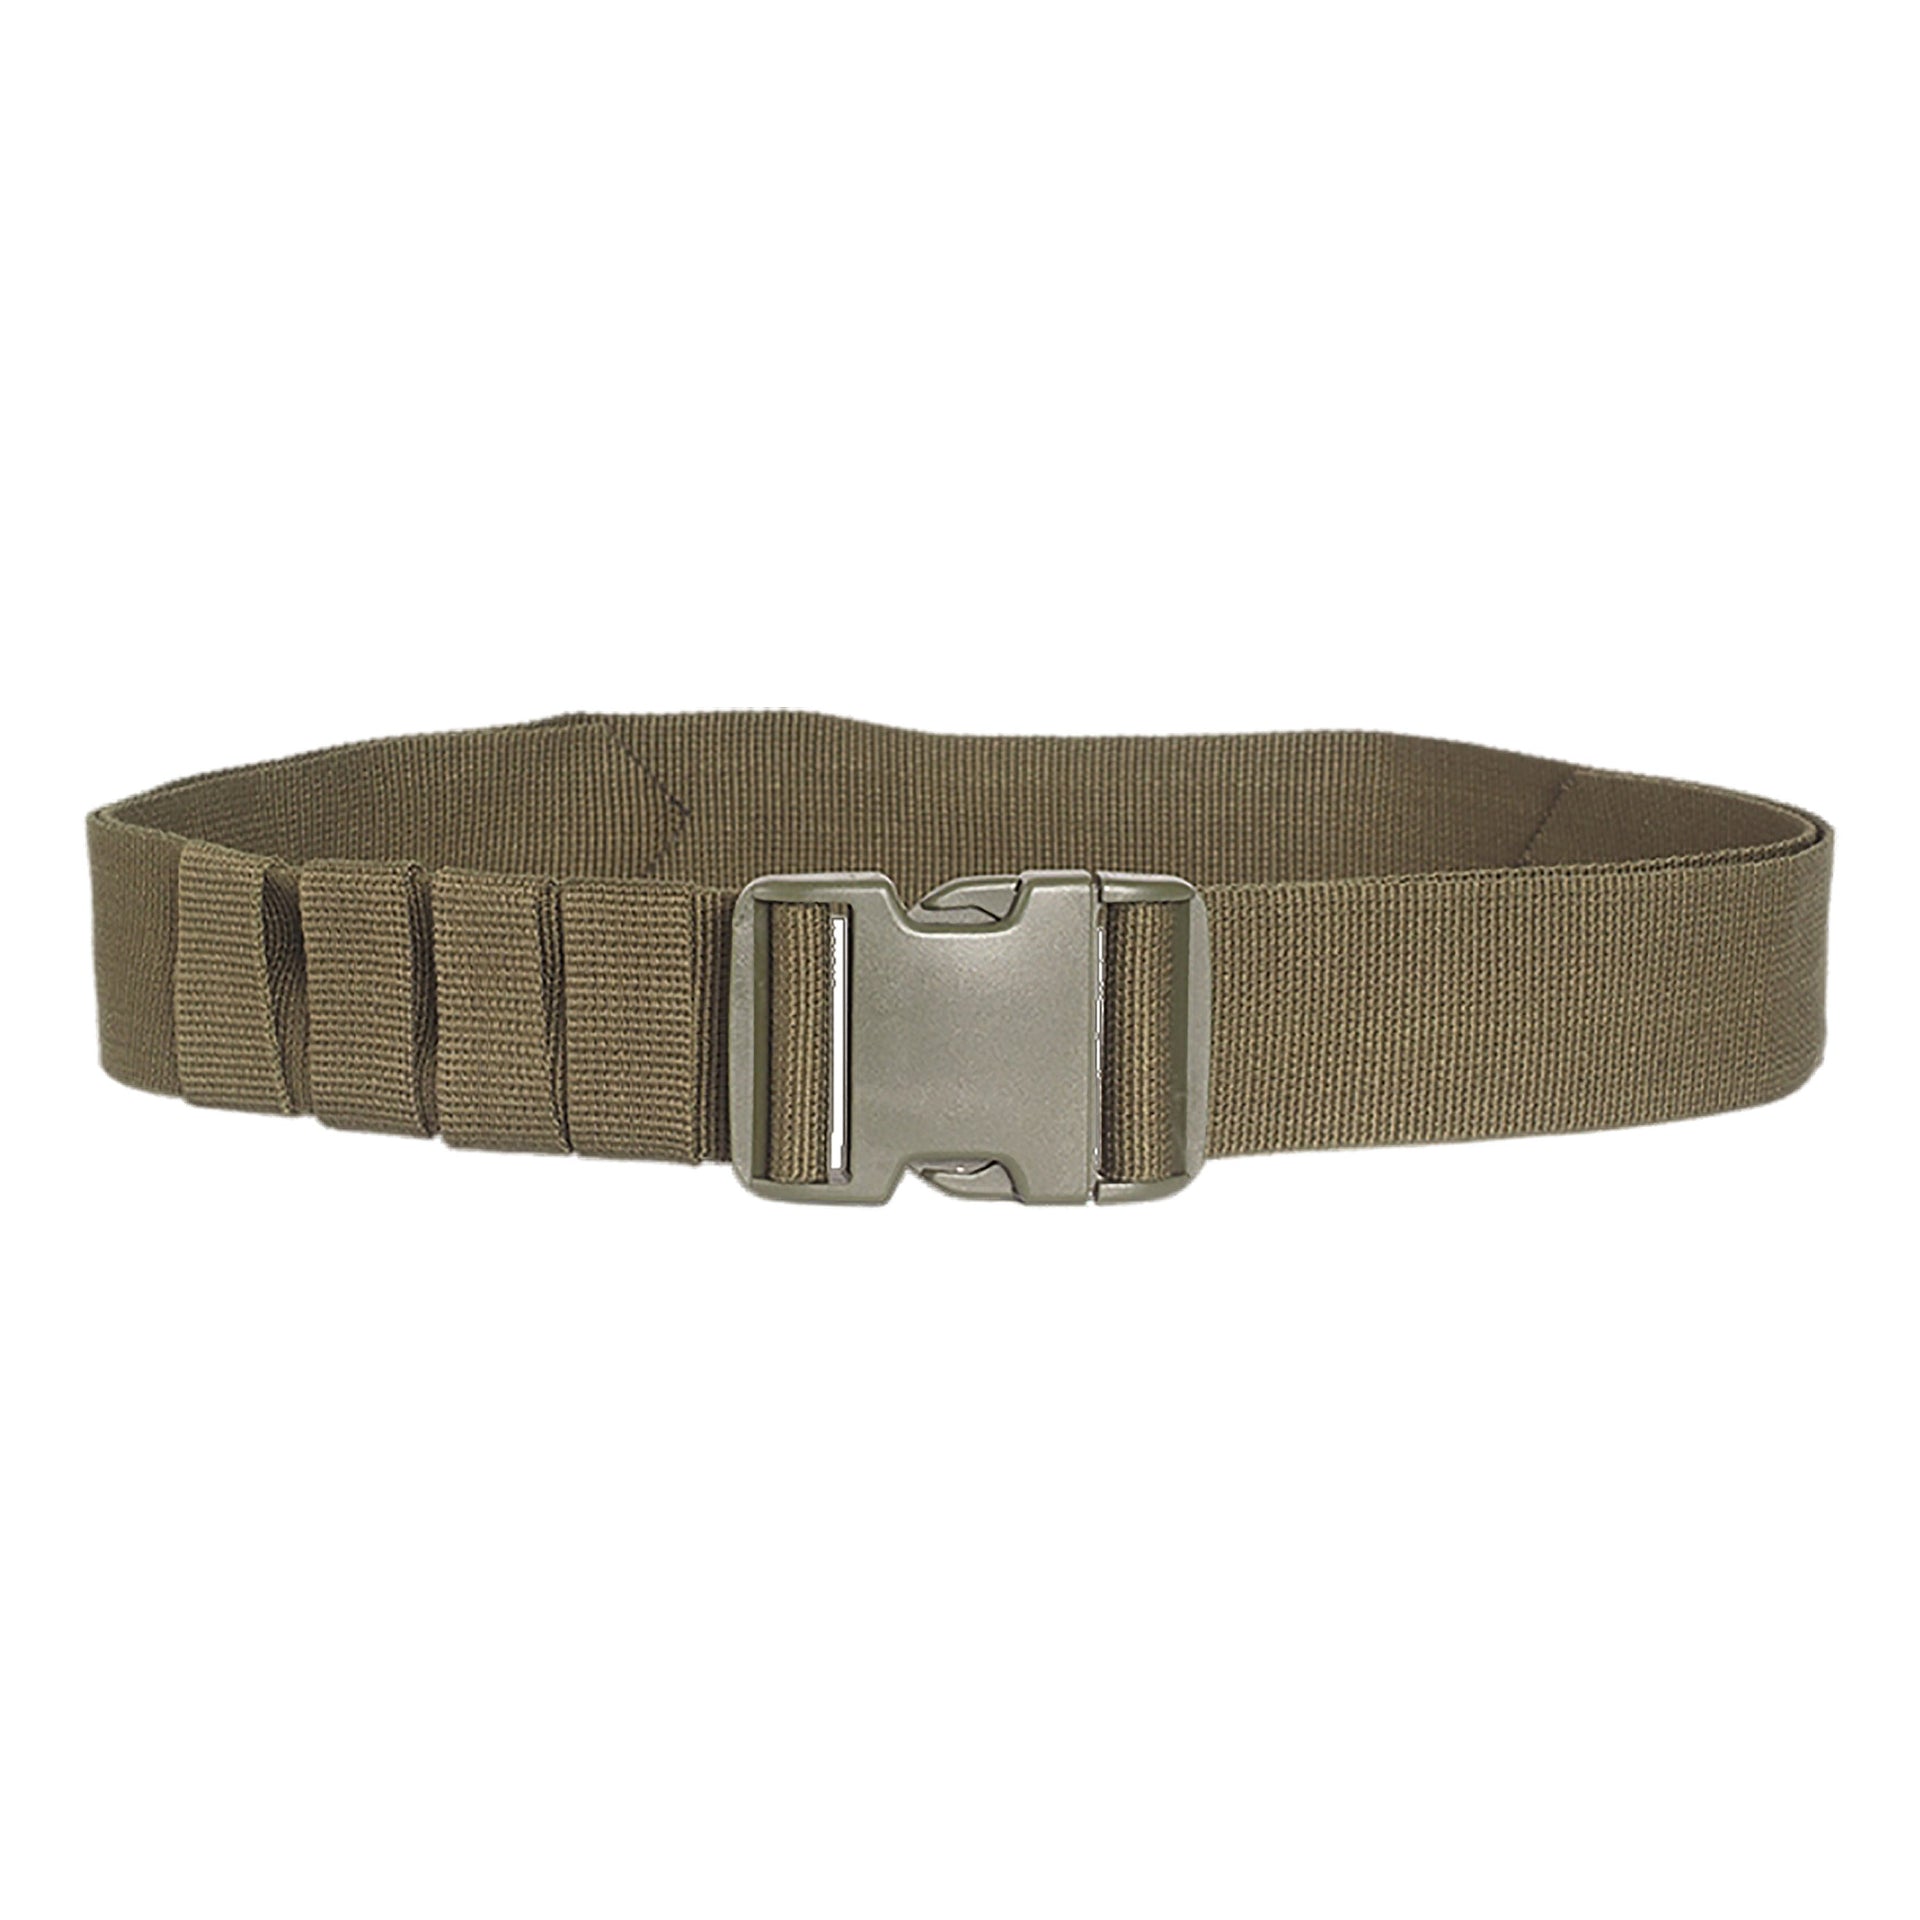 Ceinture Army quick release 50 mm